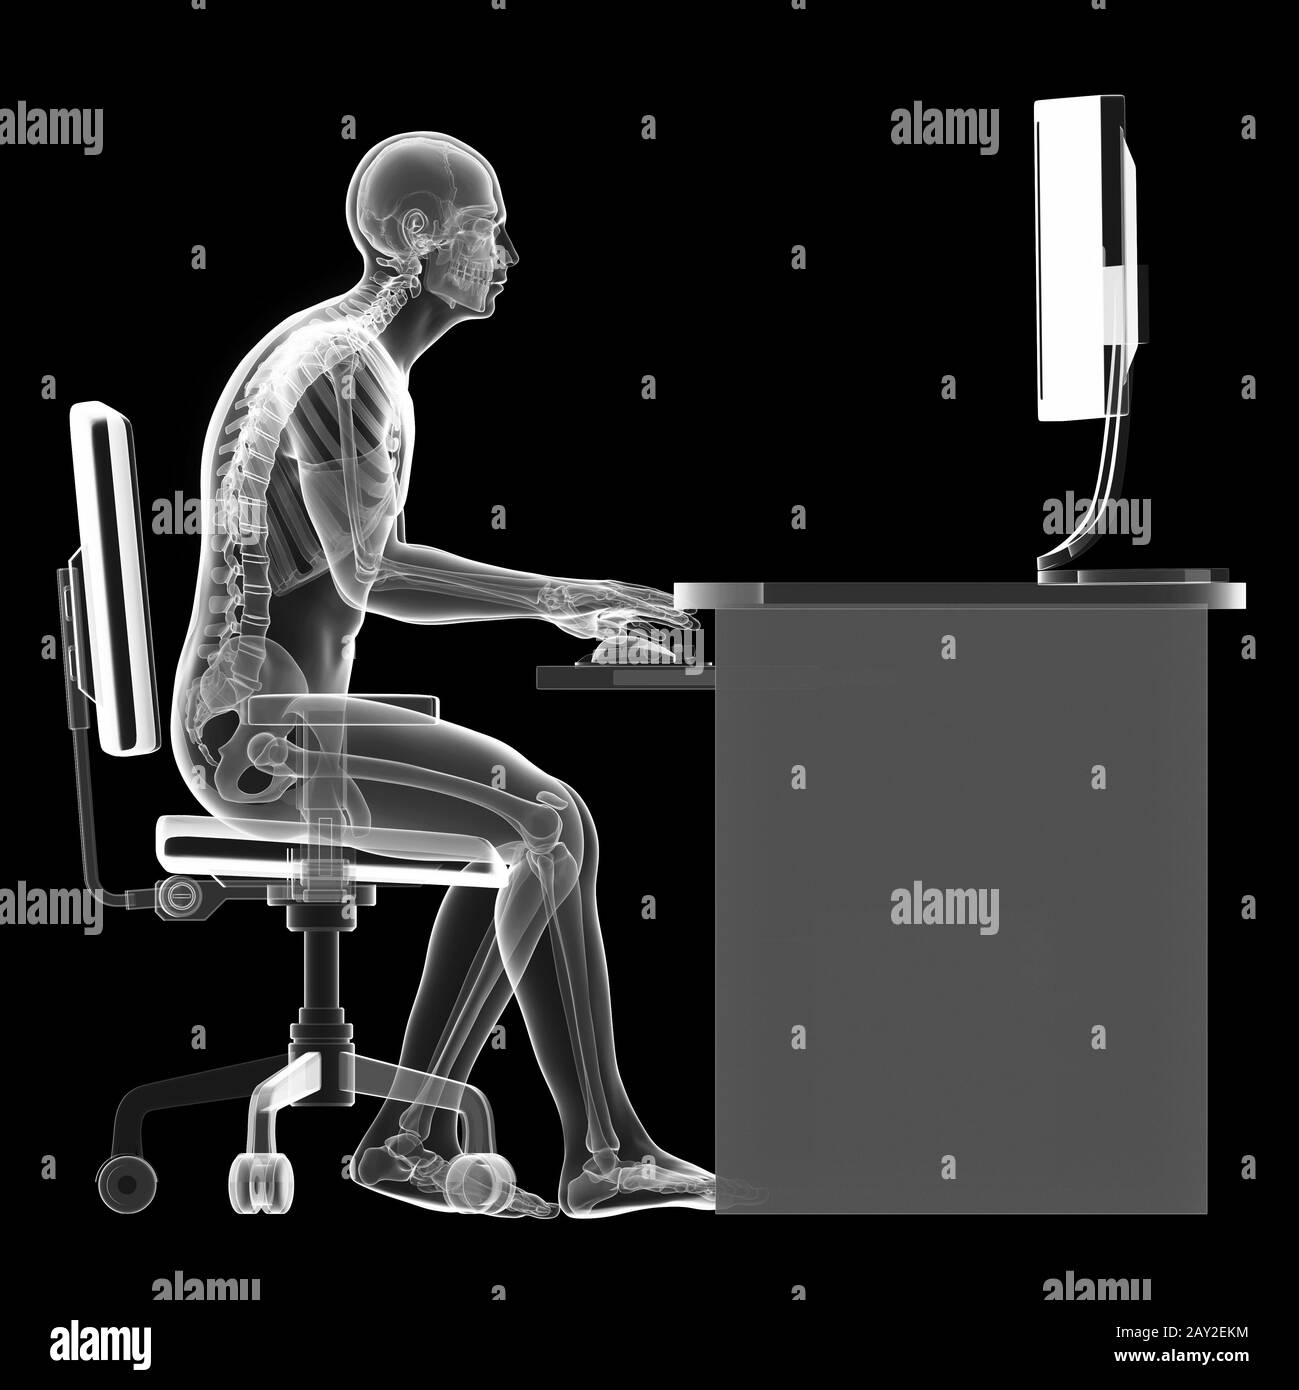 3d rendered illustration of a man working on pc - wrong sitting posture Stock Photo